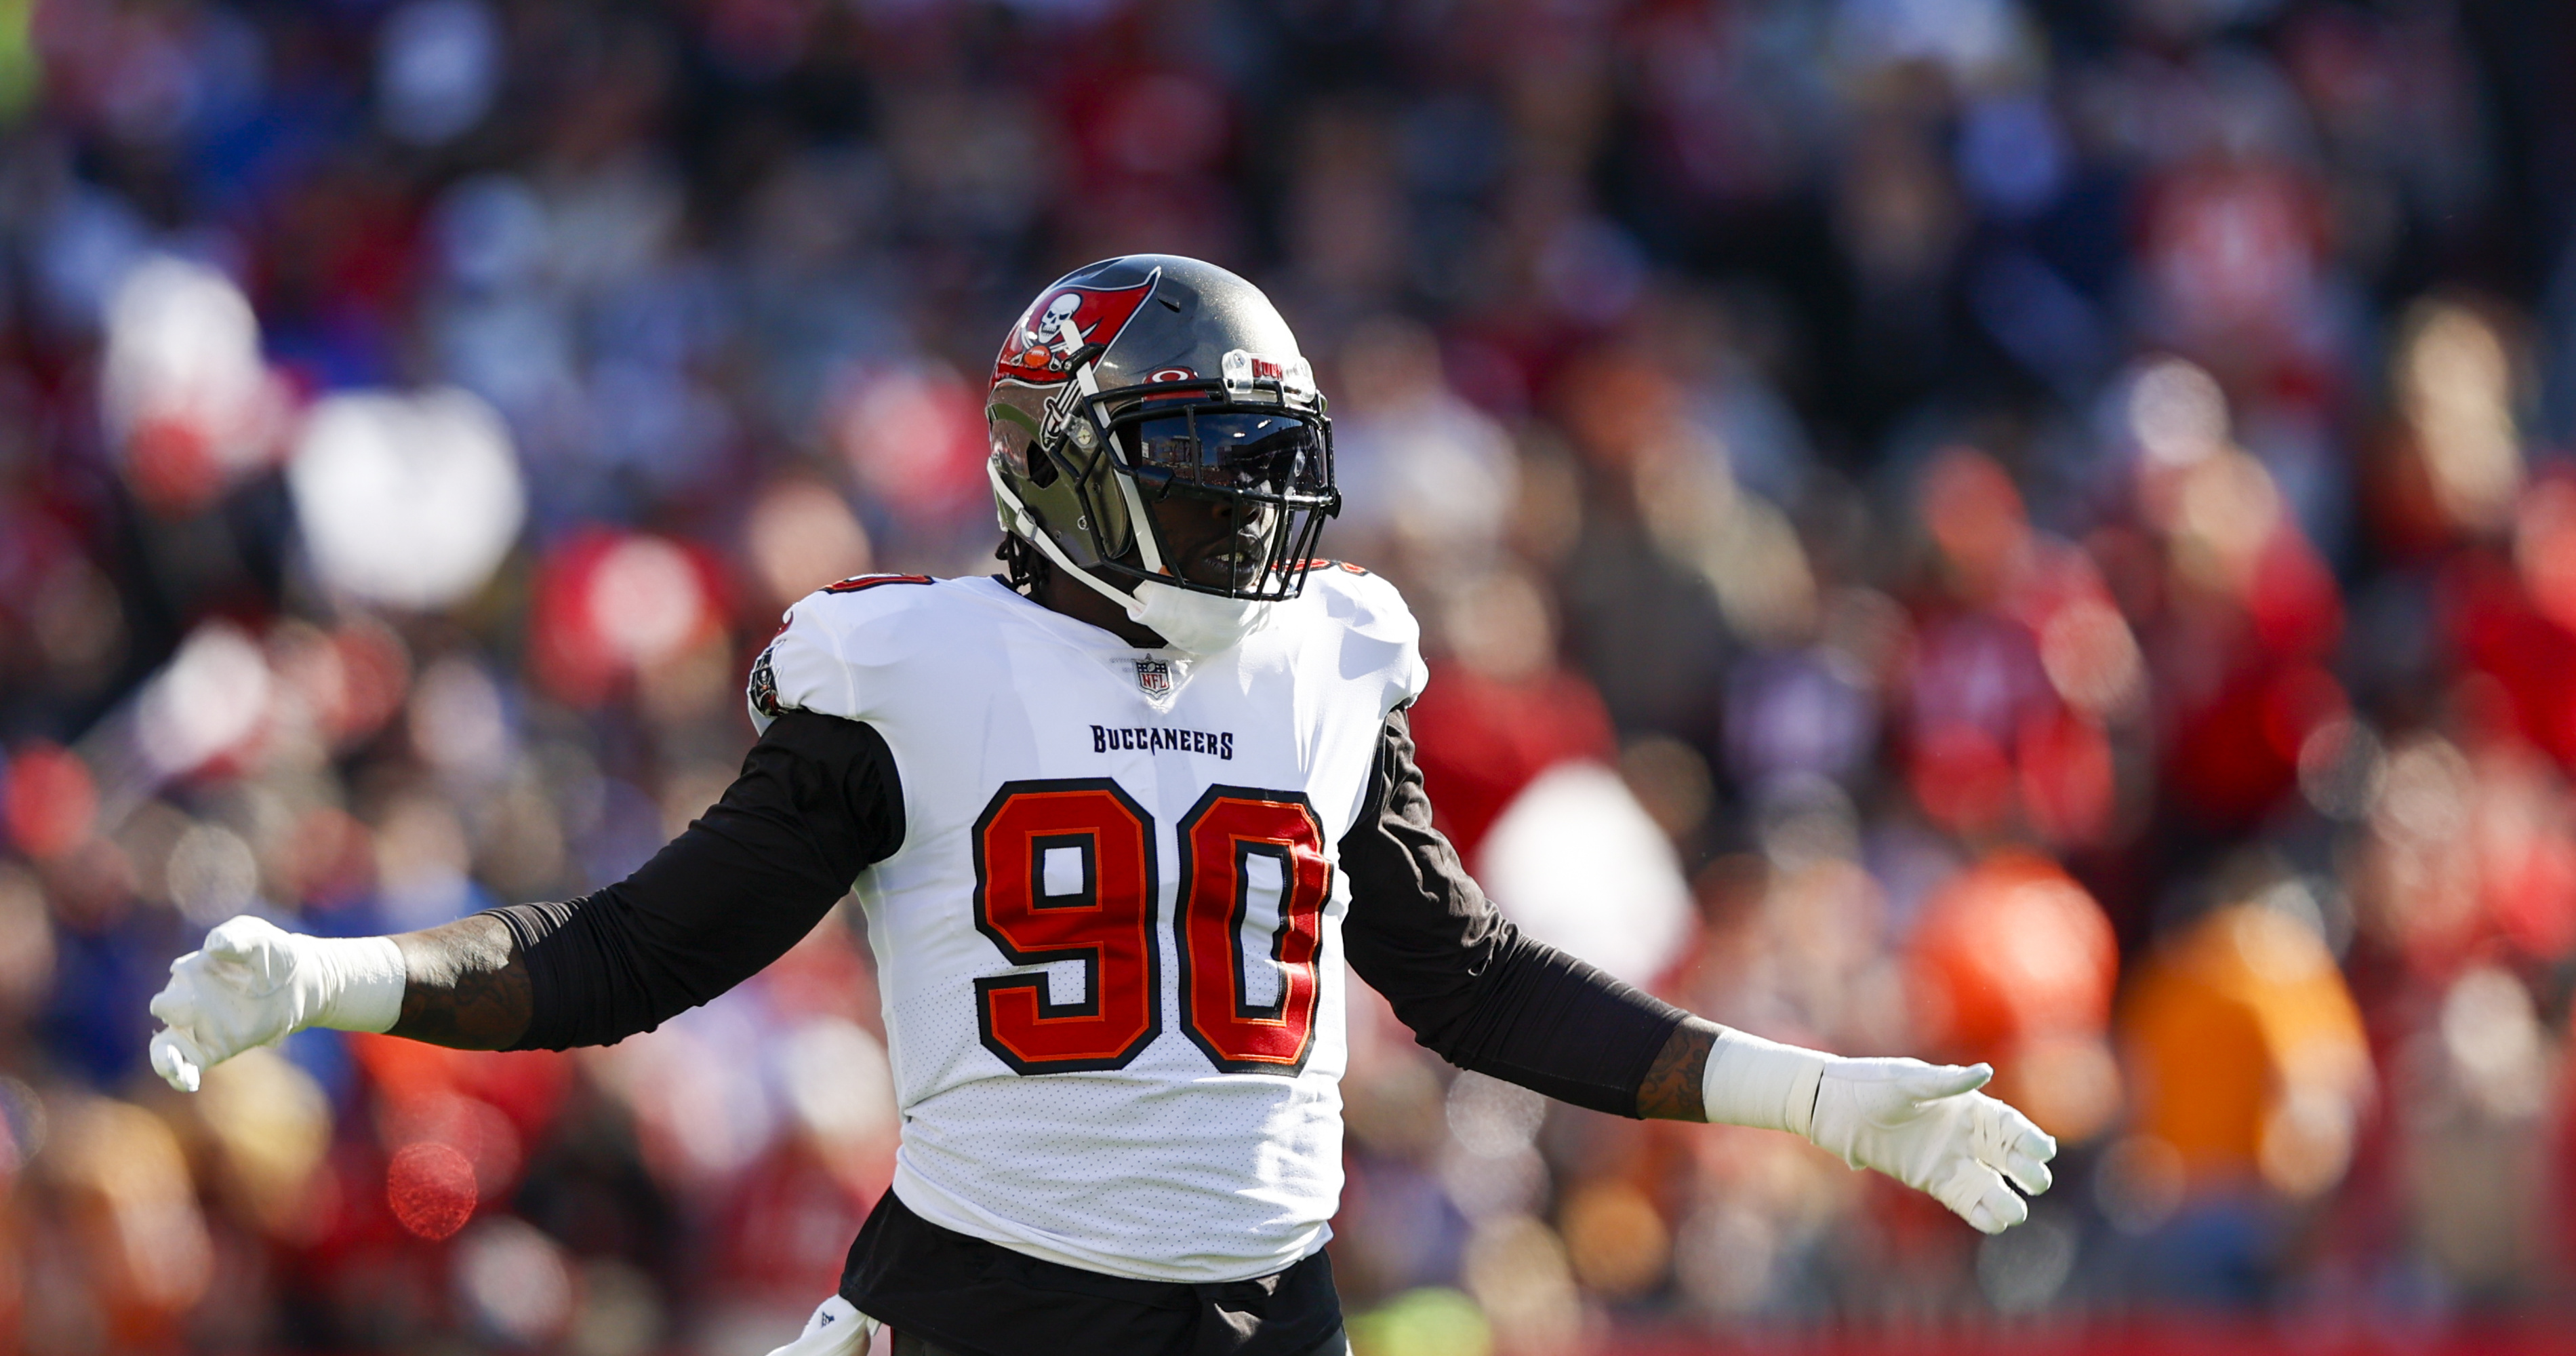 Jason Pierre-paul, Ravens Agree to 1-Year Contract Reportedly Worth Up to $5.5M